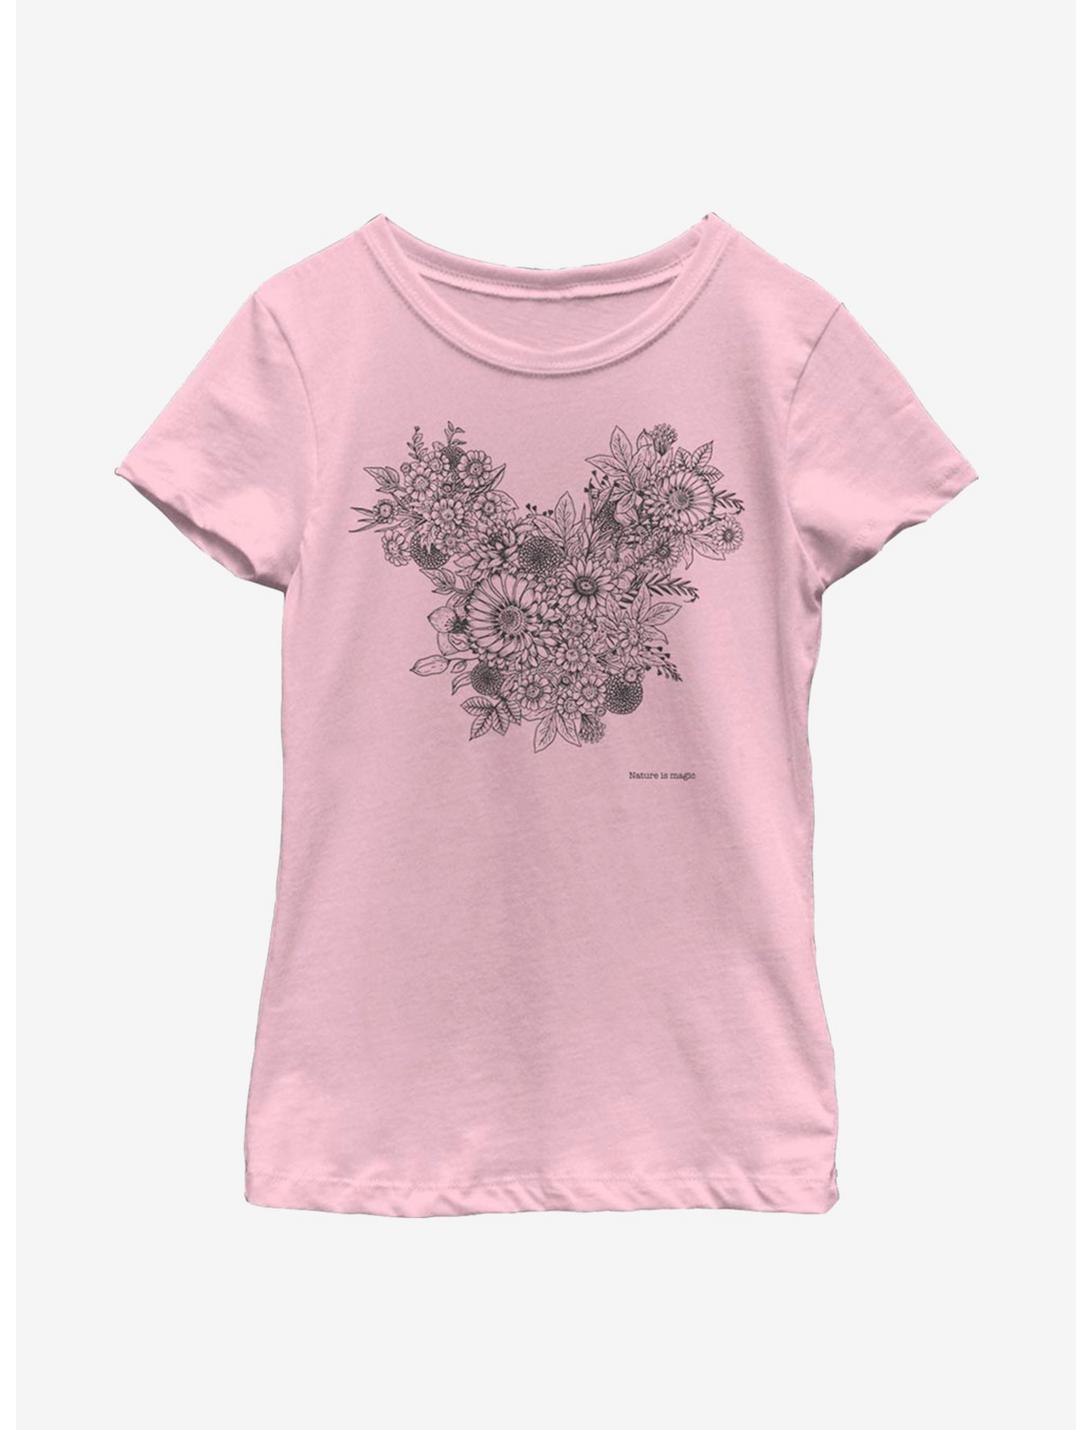 Disney Mickey Mouse Foliage Youth Girls T-Shirt, PINK, hi-res